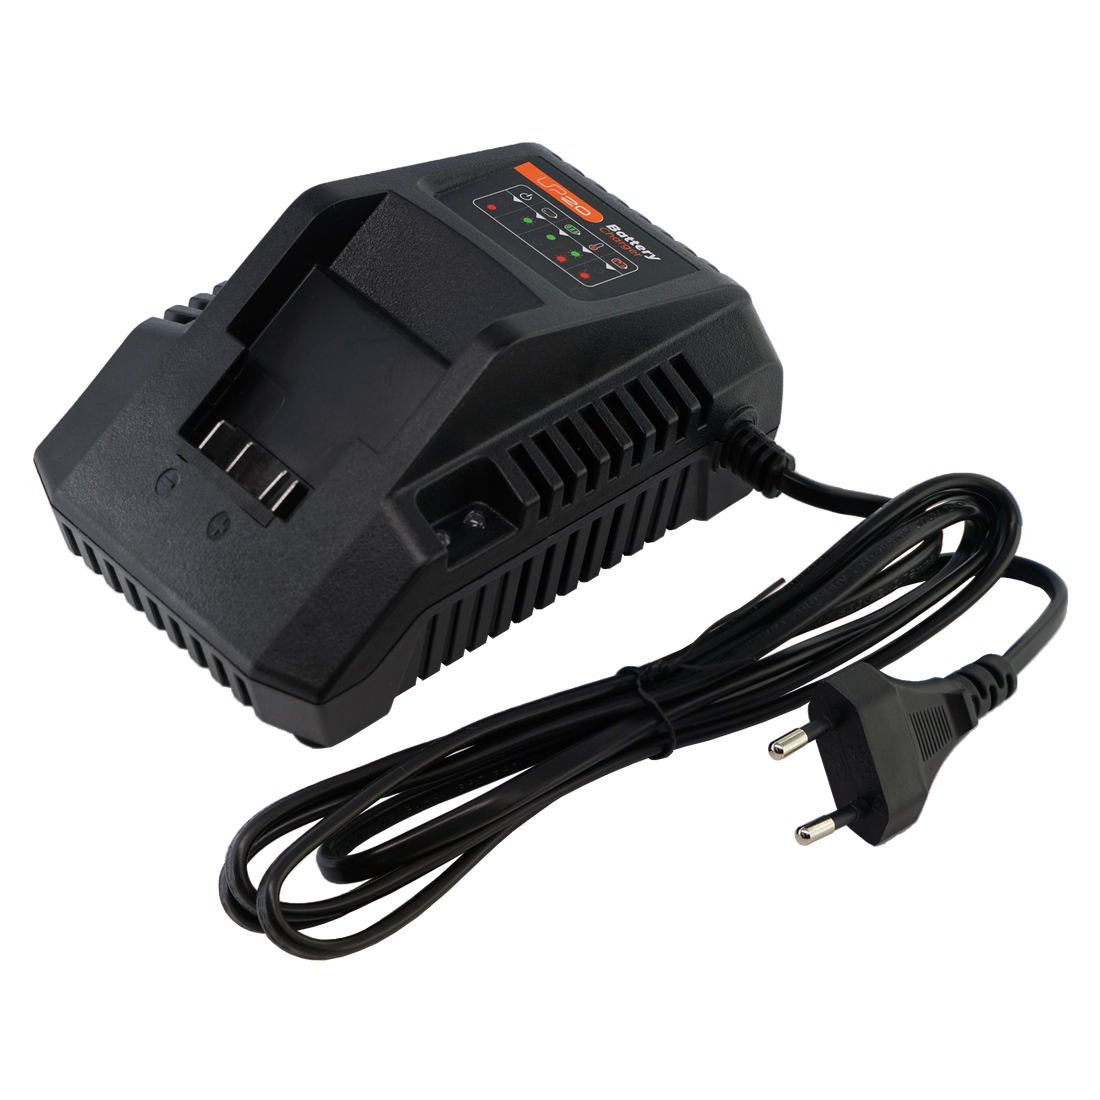 LEXMAN BATTERY CHARGER FOR 20 V LITHIUM BATTERIES